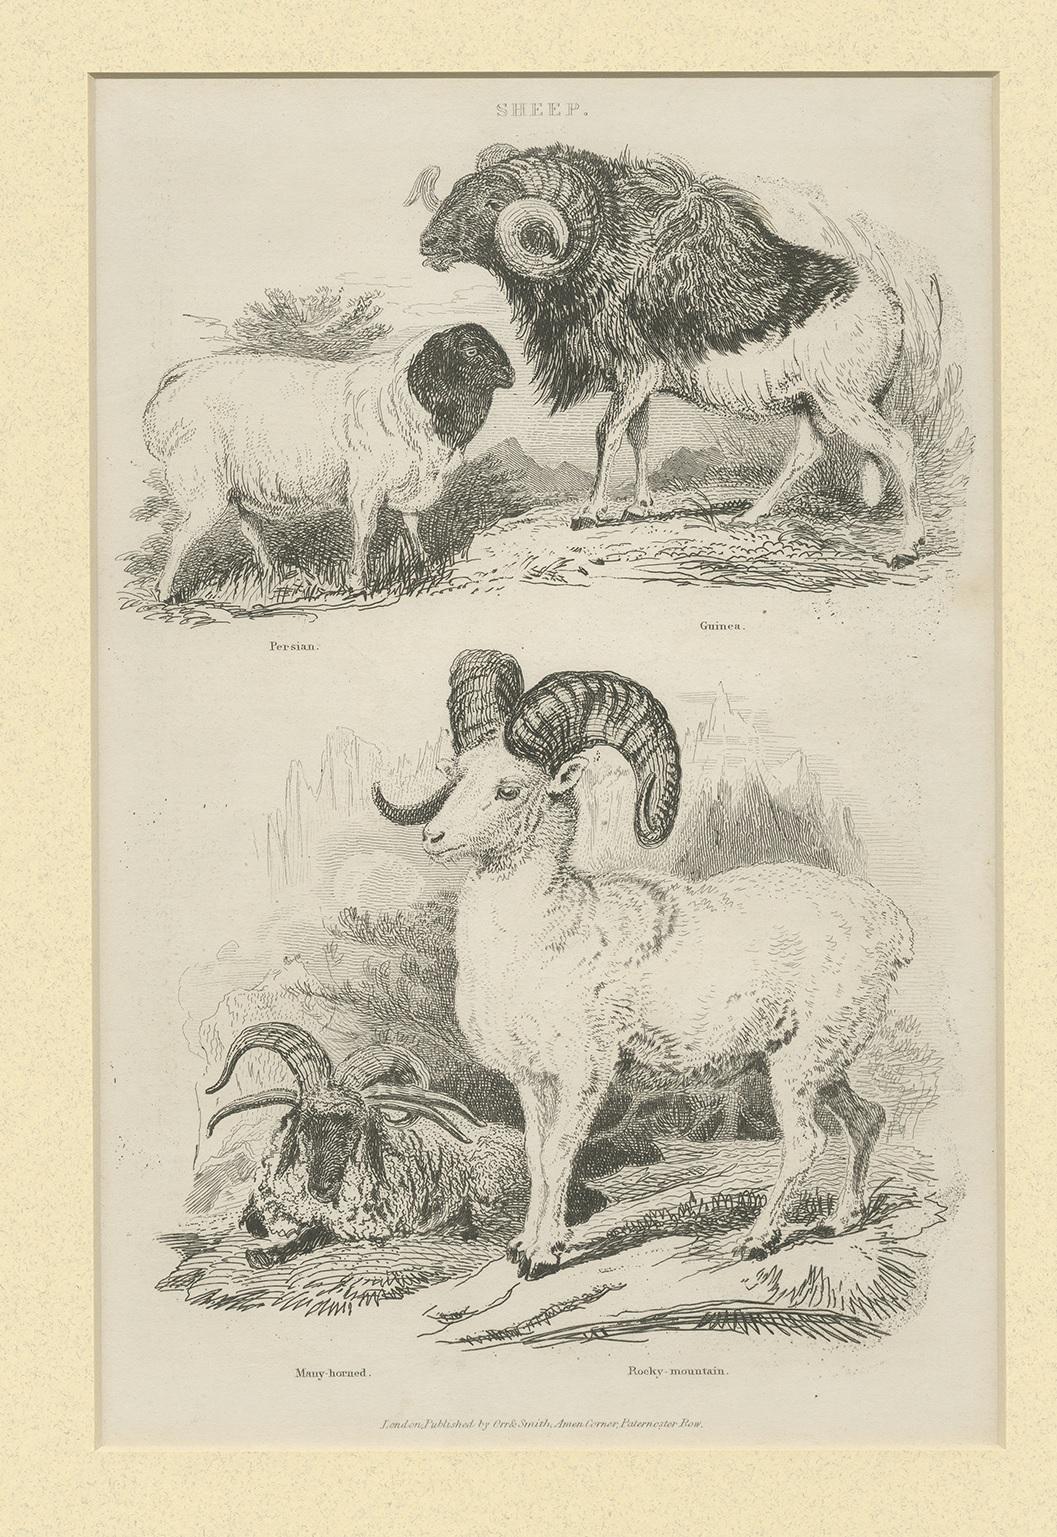 Antique print titled 'Sheep'. Print of sheep including the Persian sheep, Guinea sheep, many-horned sheep and rocky-mountain sheep. This print originates from 'British Cyclopaedia of Natural History' by Charles Partington.

Passepartout included.